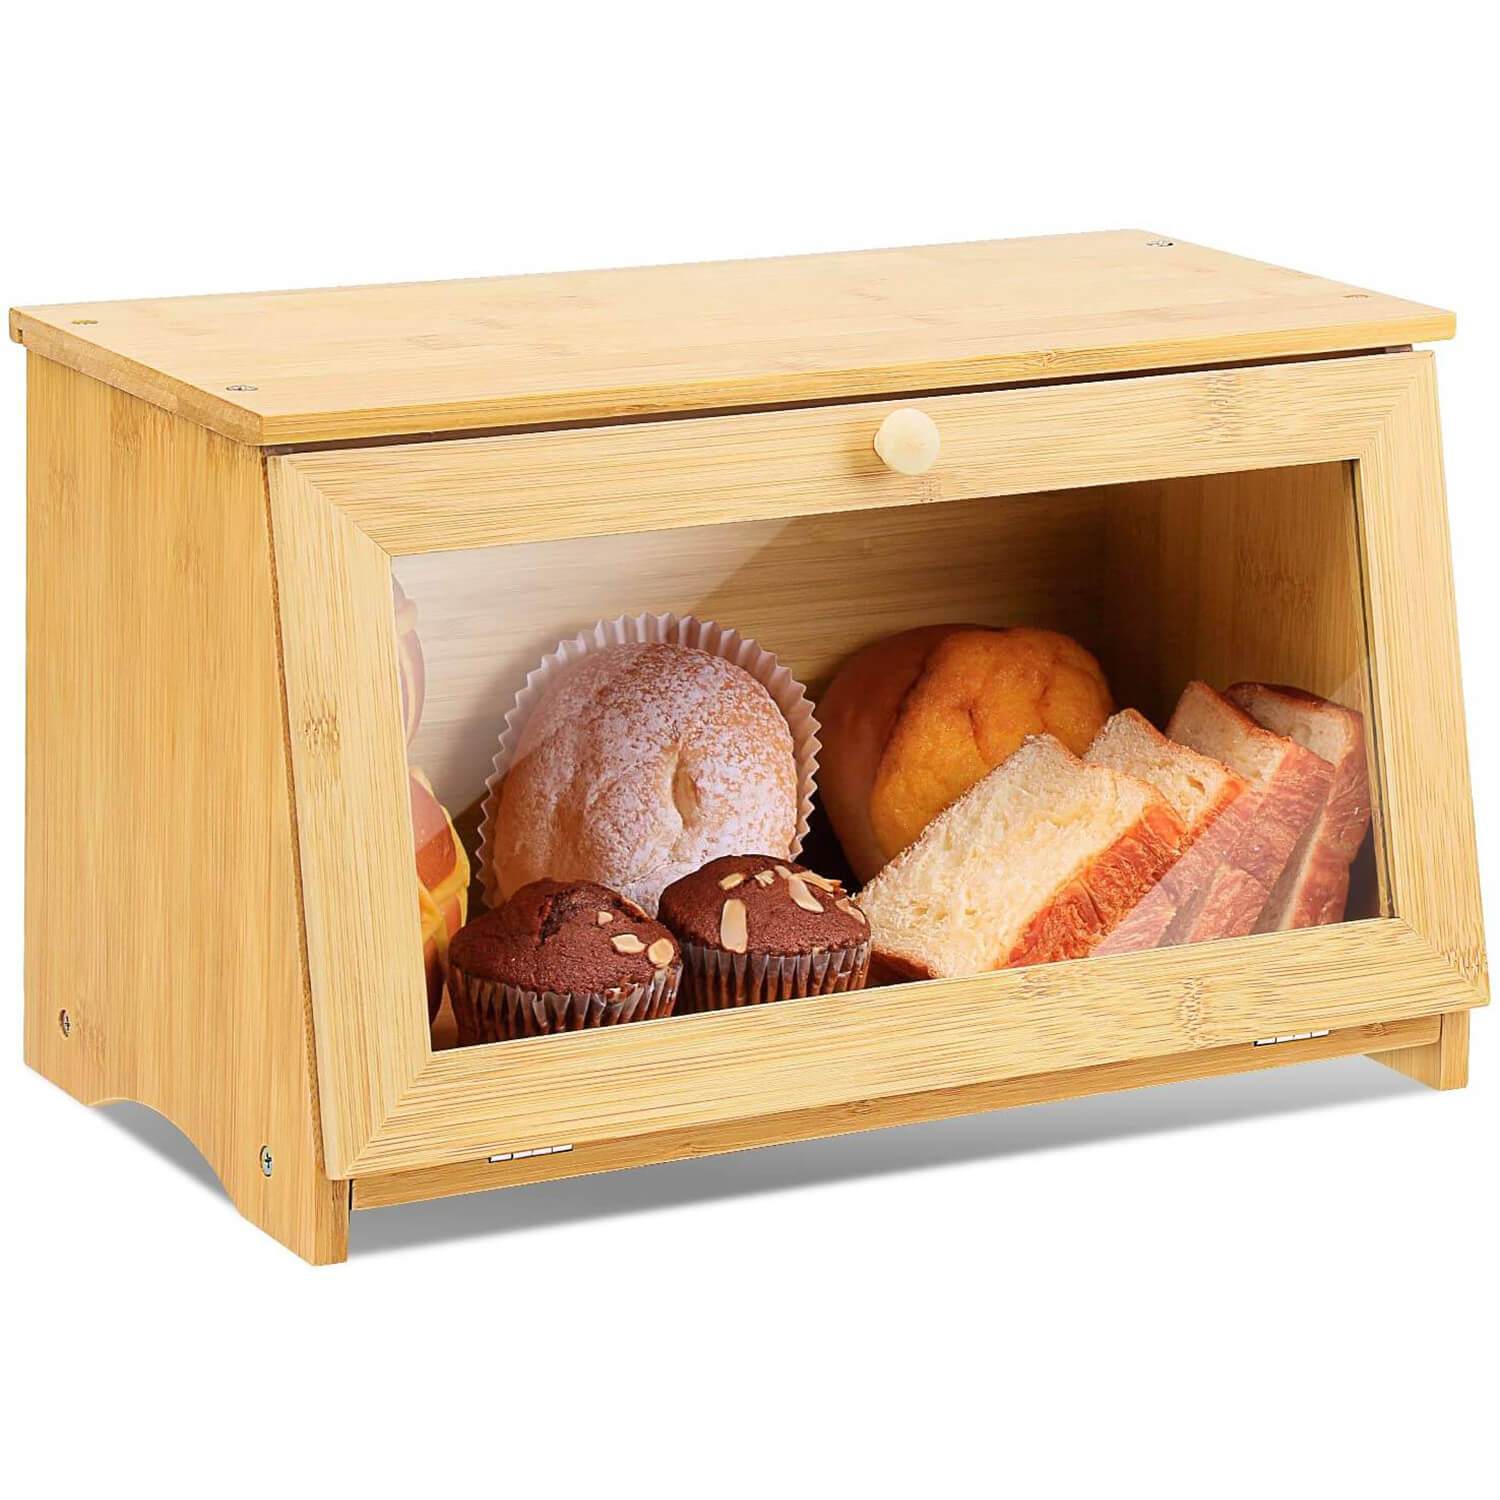 Large Bread Box for Kitchen Counter Double Layer Bamboo Wooden Extra Large Capacity Bread Storage Bin Kitchen Food Storage Container Farmhouse Style W